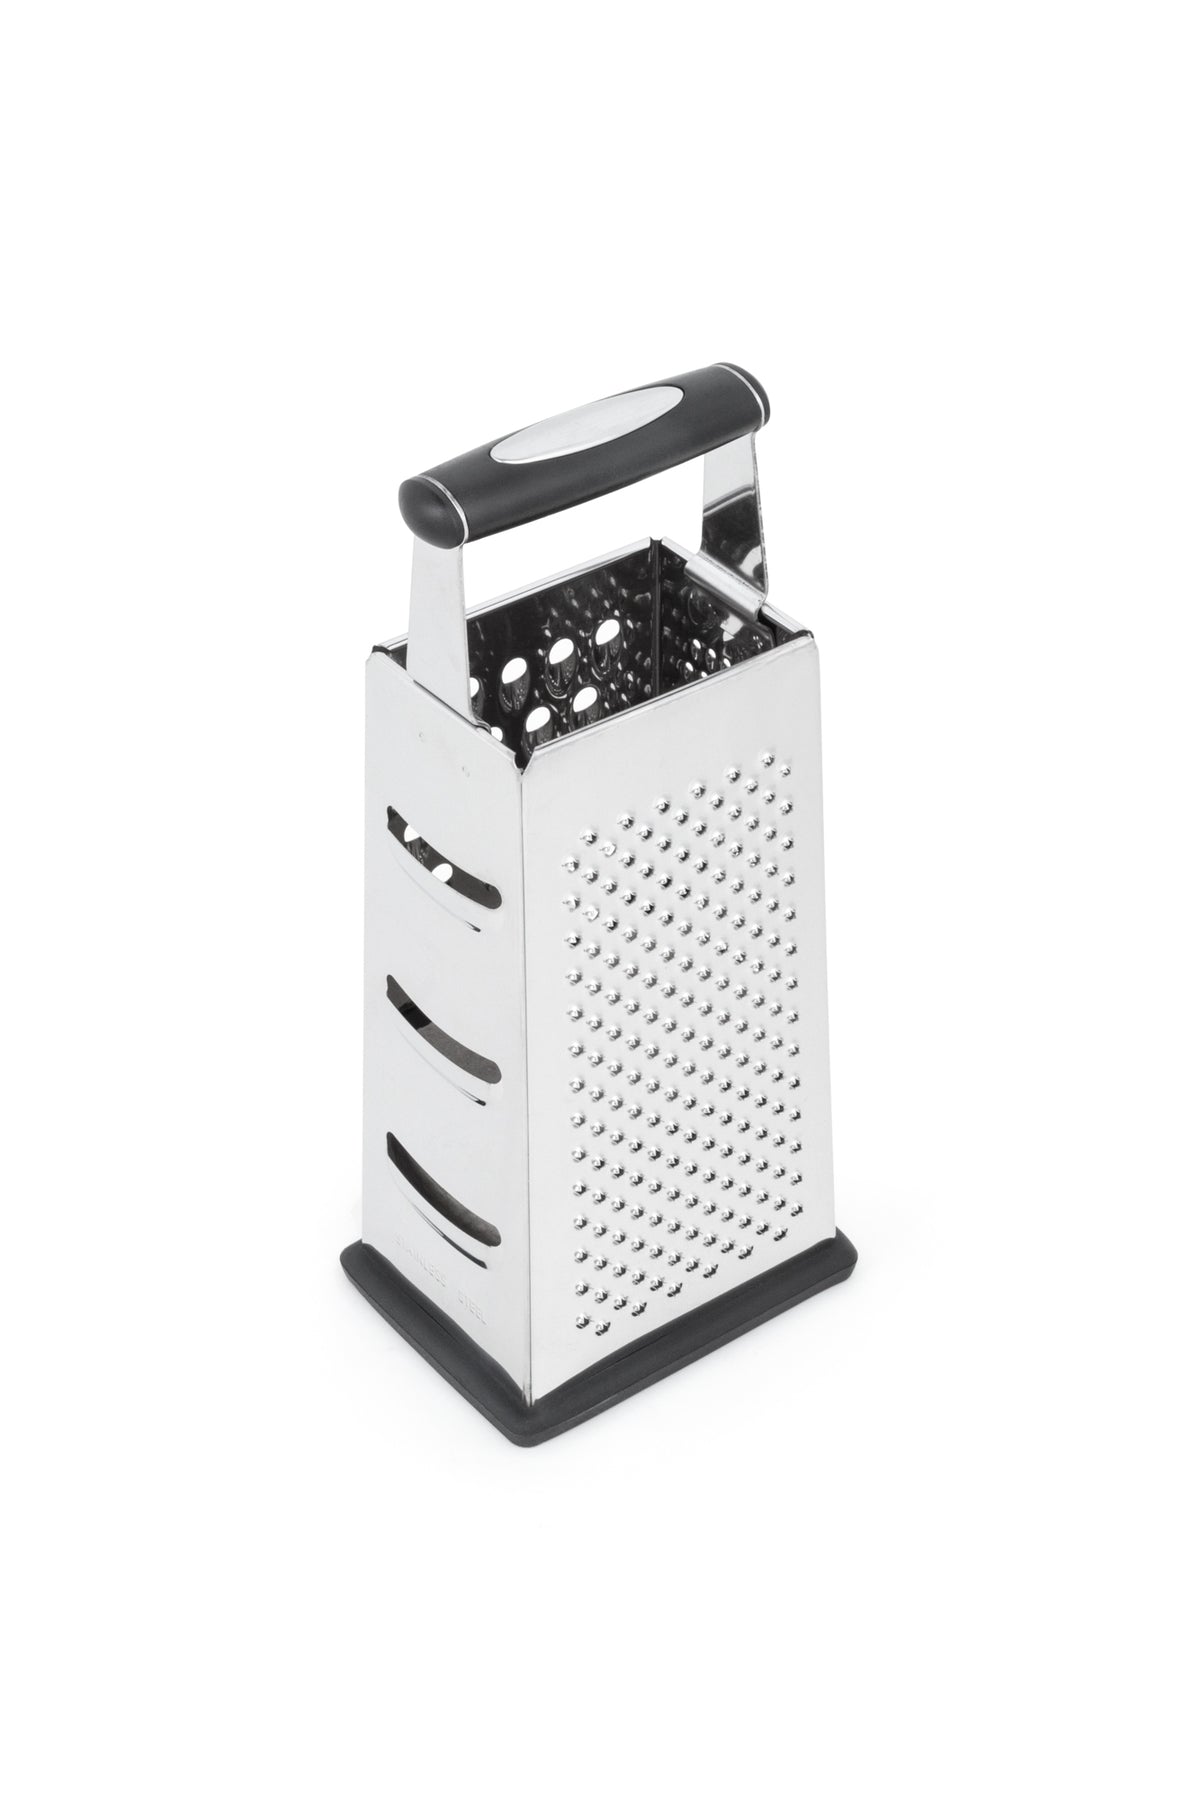 Box Grater-4 sided